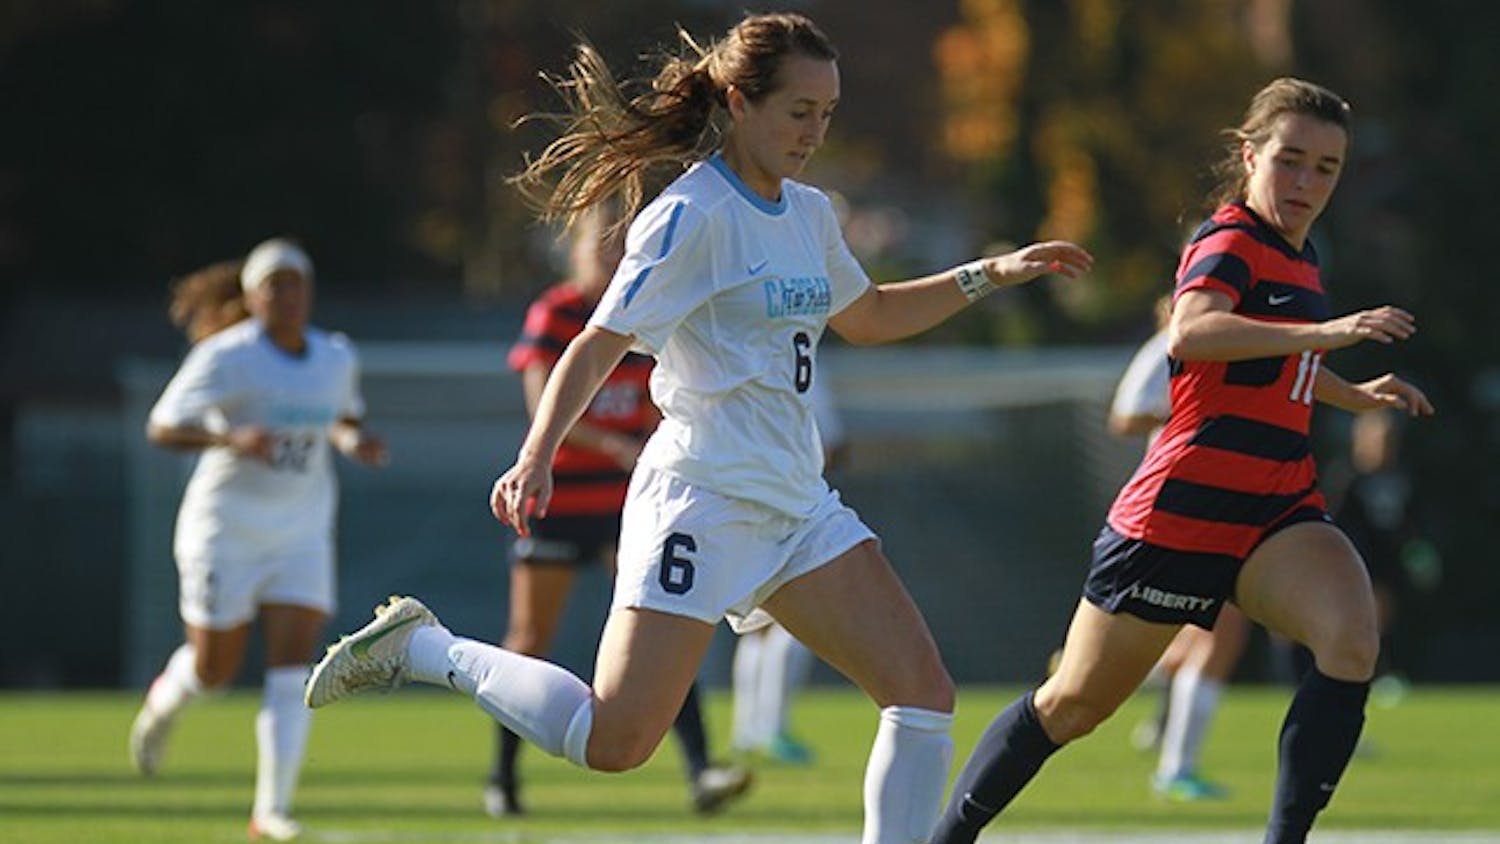 UNC Women's Soccer Defeats Liberty Flames 4-0 in the first round of the NCAA tournament.